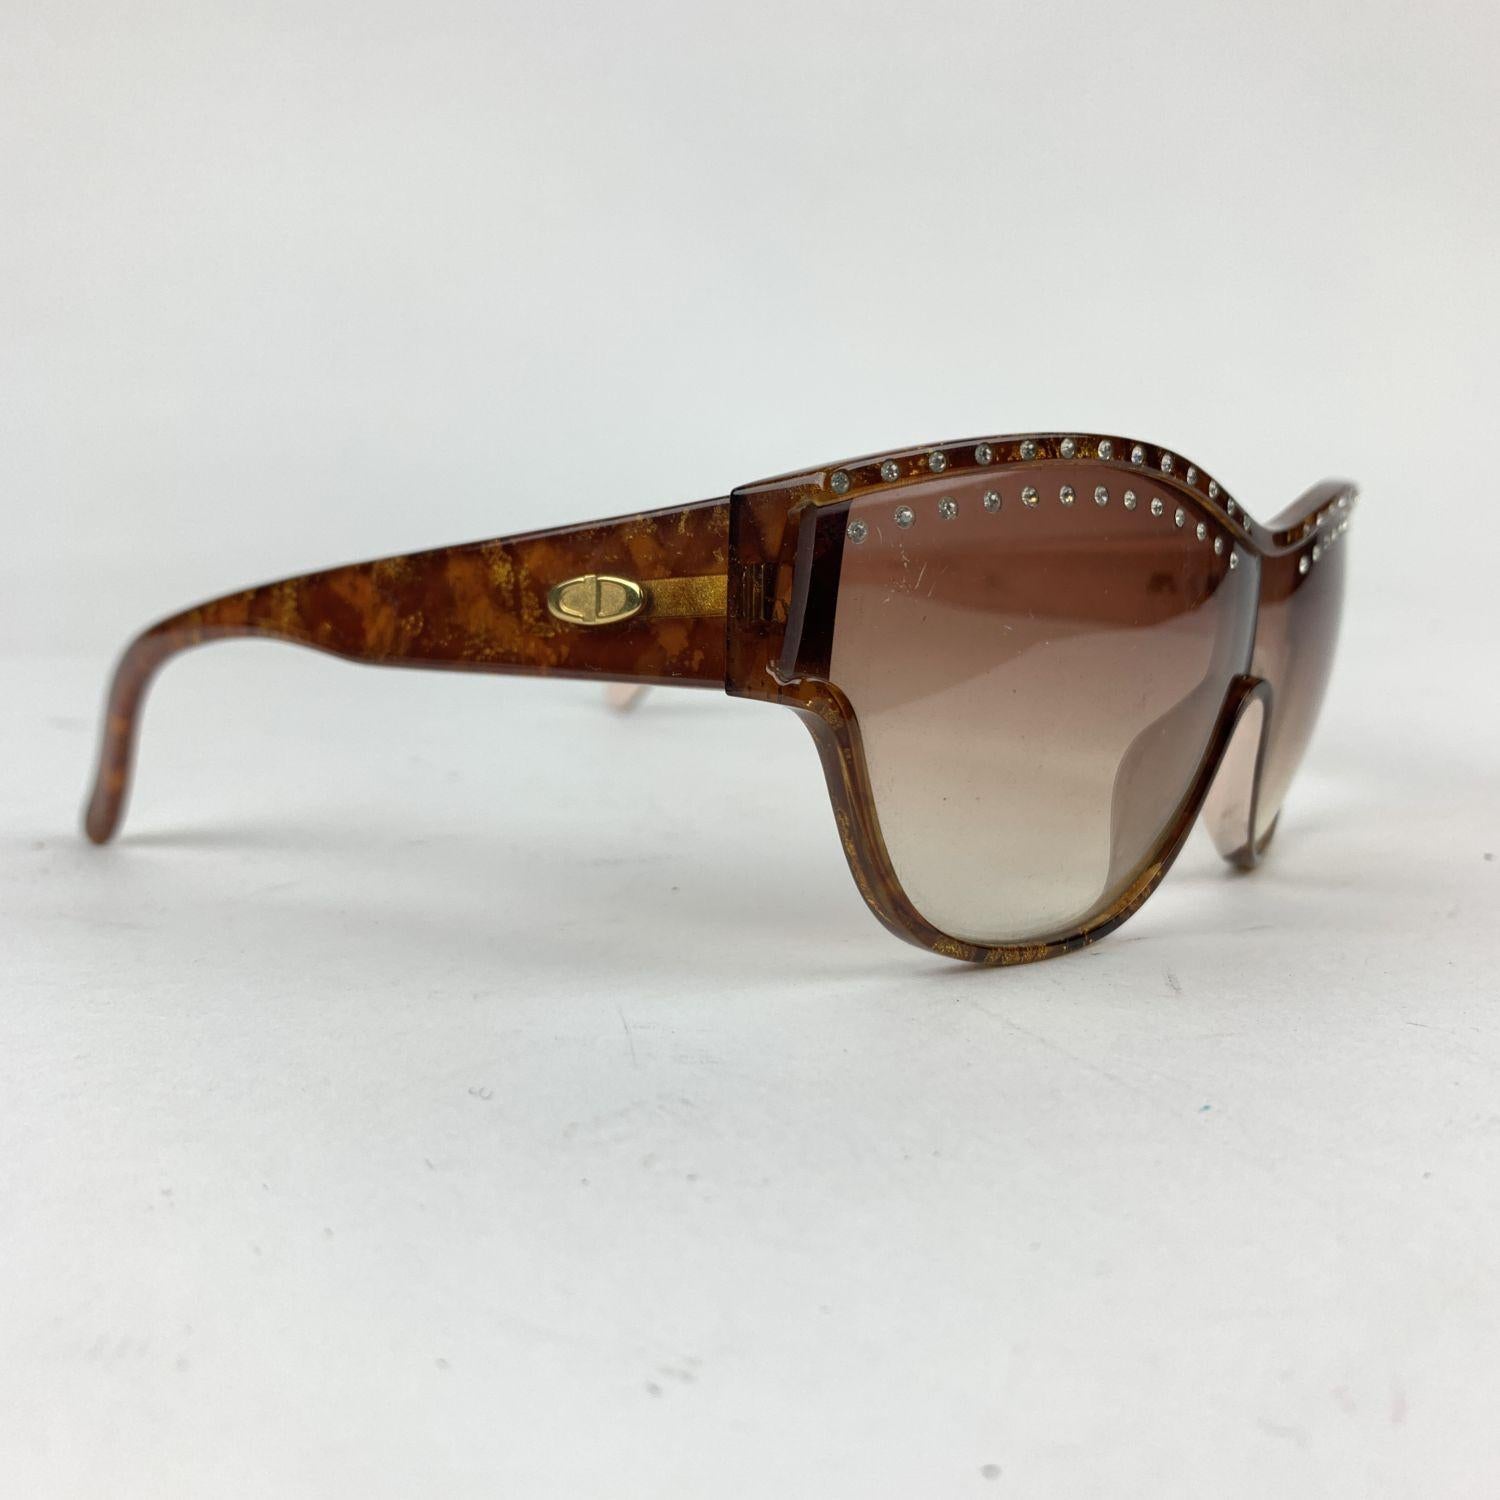 Christian Dior Vintage Sunglasses, Model 2438. Brown Optyl frame, with glitter detailing. Rhinestones embellishment on the upper part. CD, logo on temples. Brown gradient lenses. Made in Germany. Style & Refs: 2430 - 40 - 135


Details

MATERIAL: